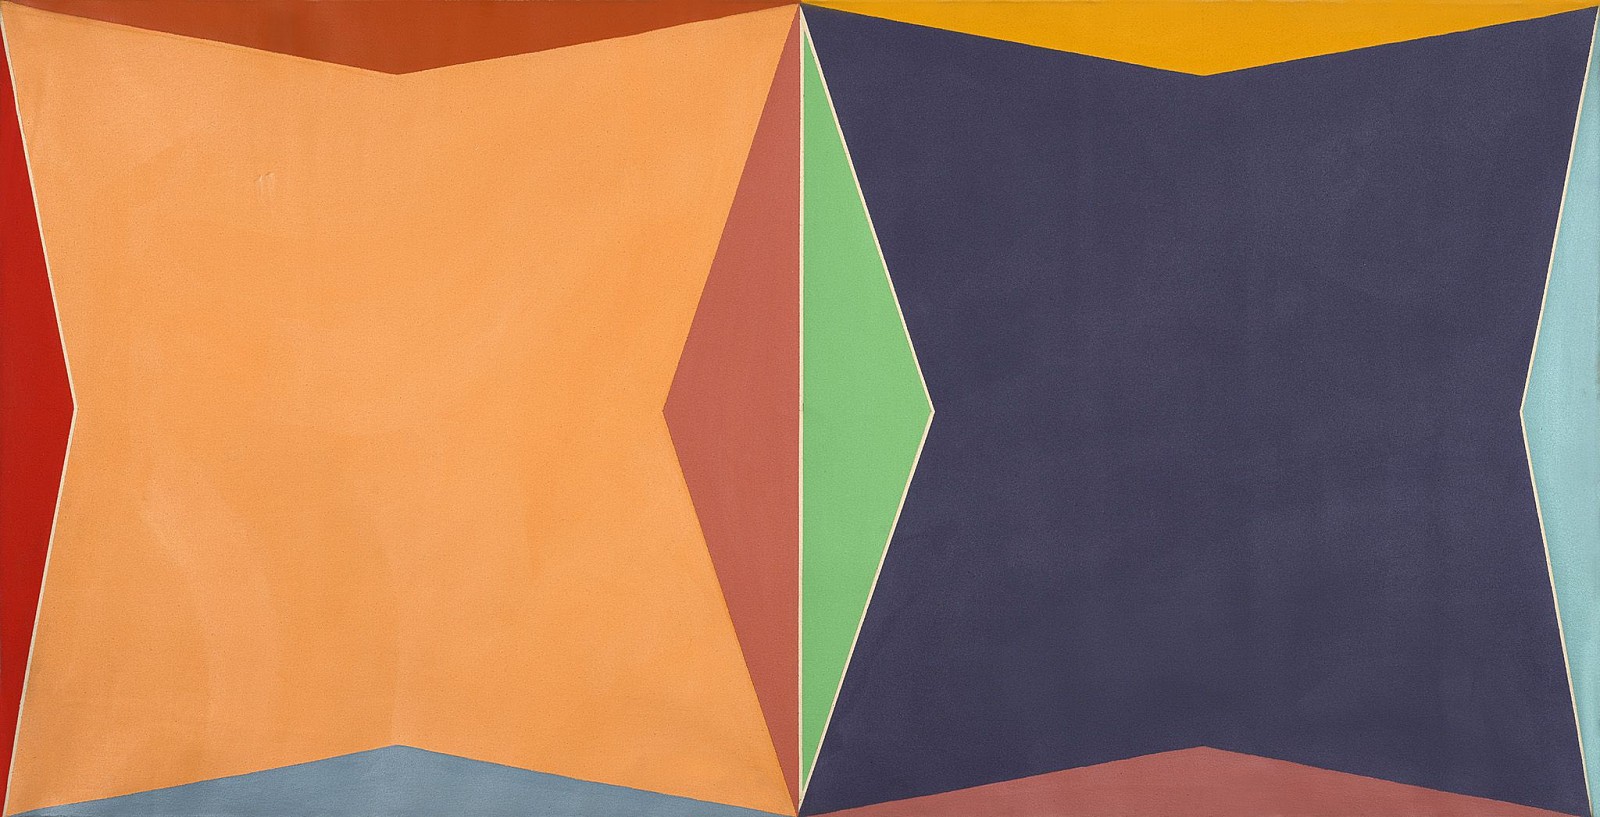 Larry Zox, Untitled, 1969
Acrylic on canvas, 50 x 99 1/2 in. (127 x 252.7 cm)
ZOX-00052